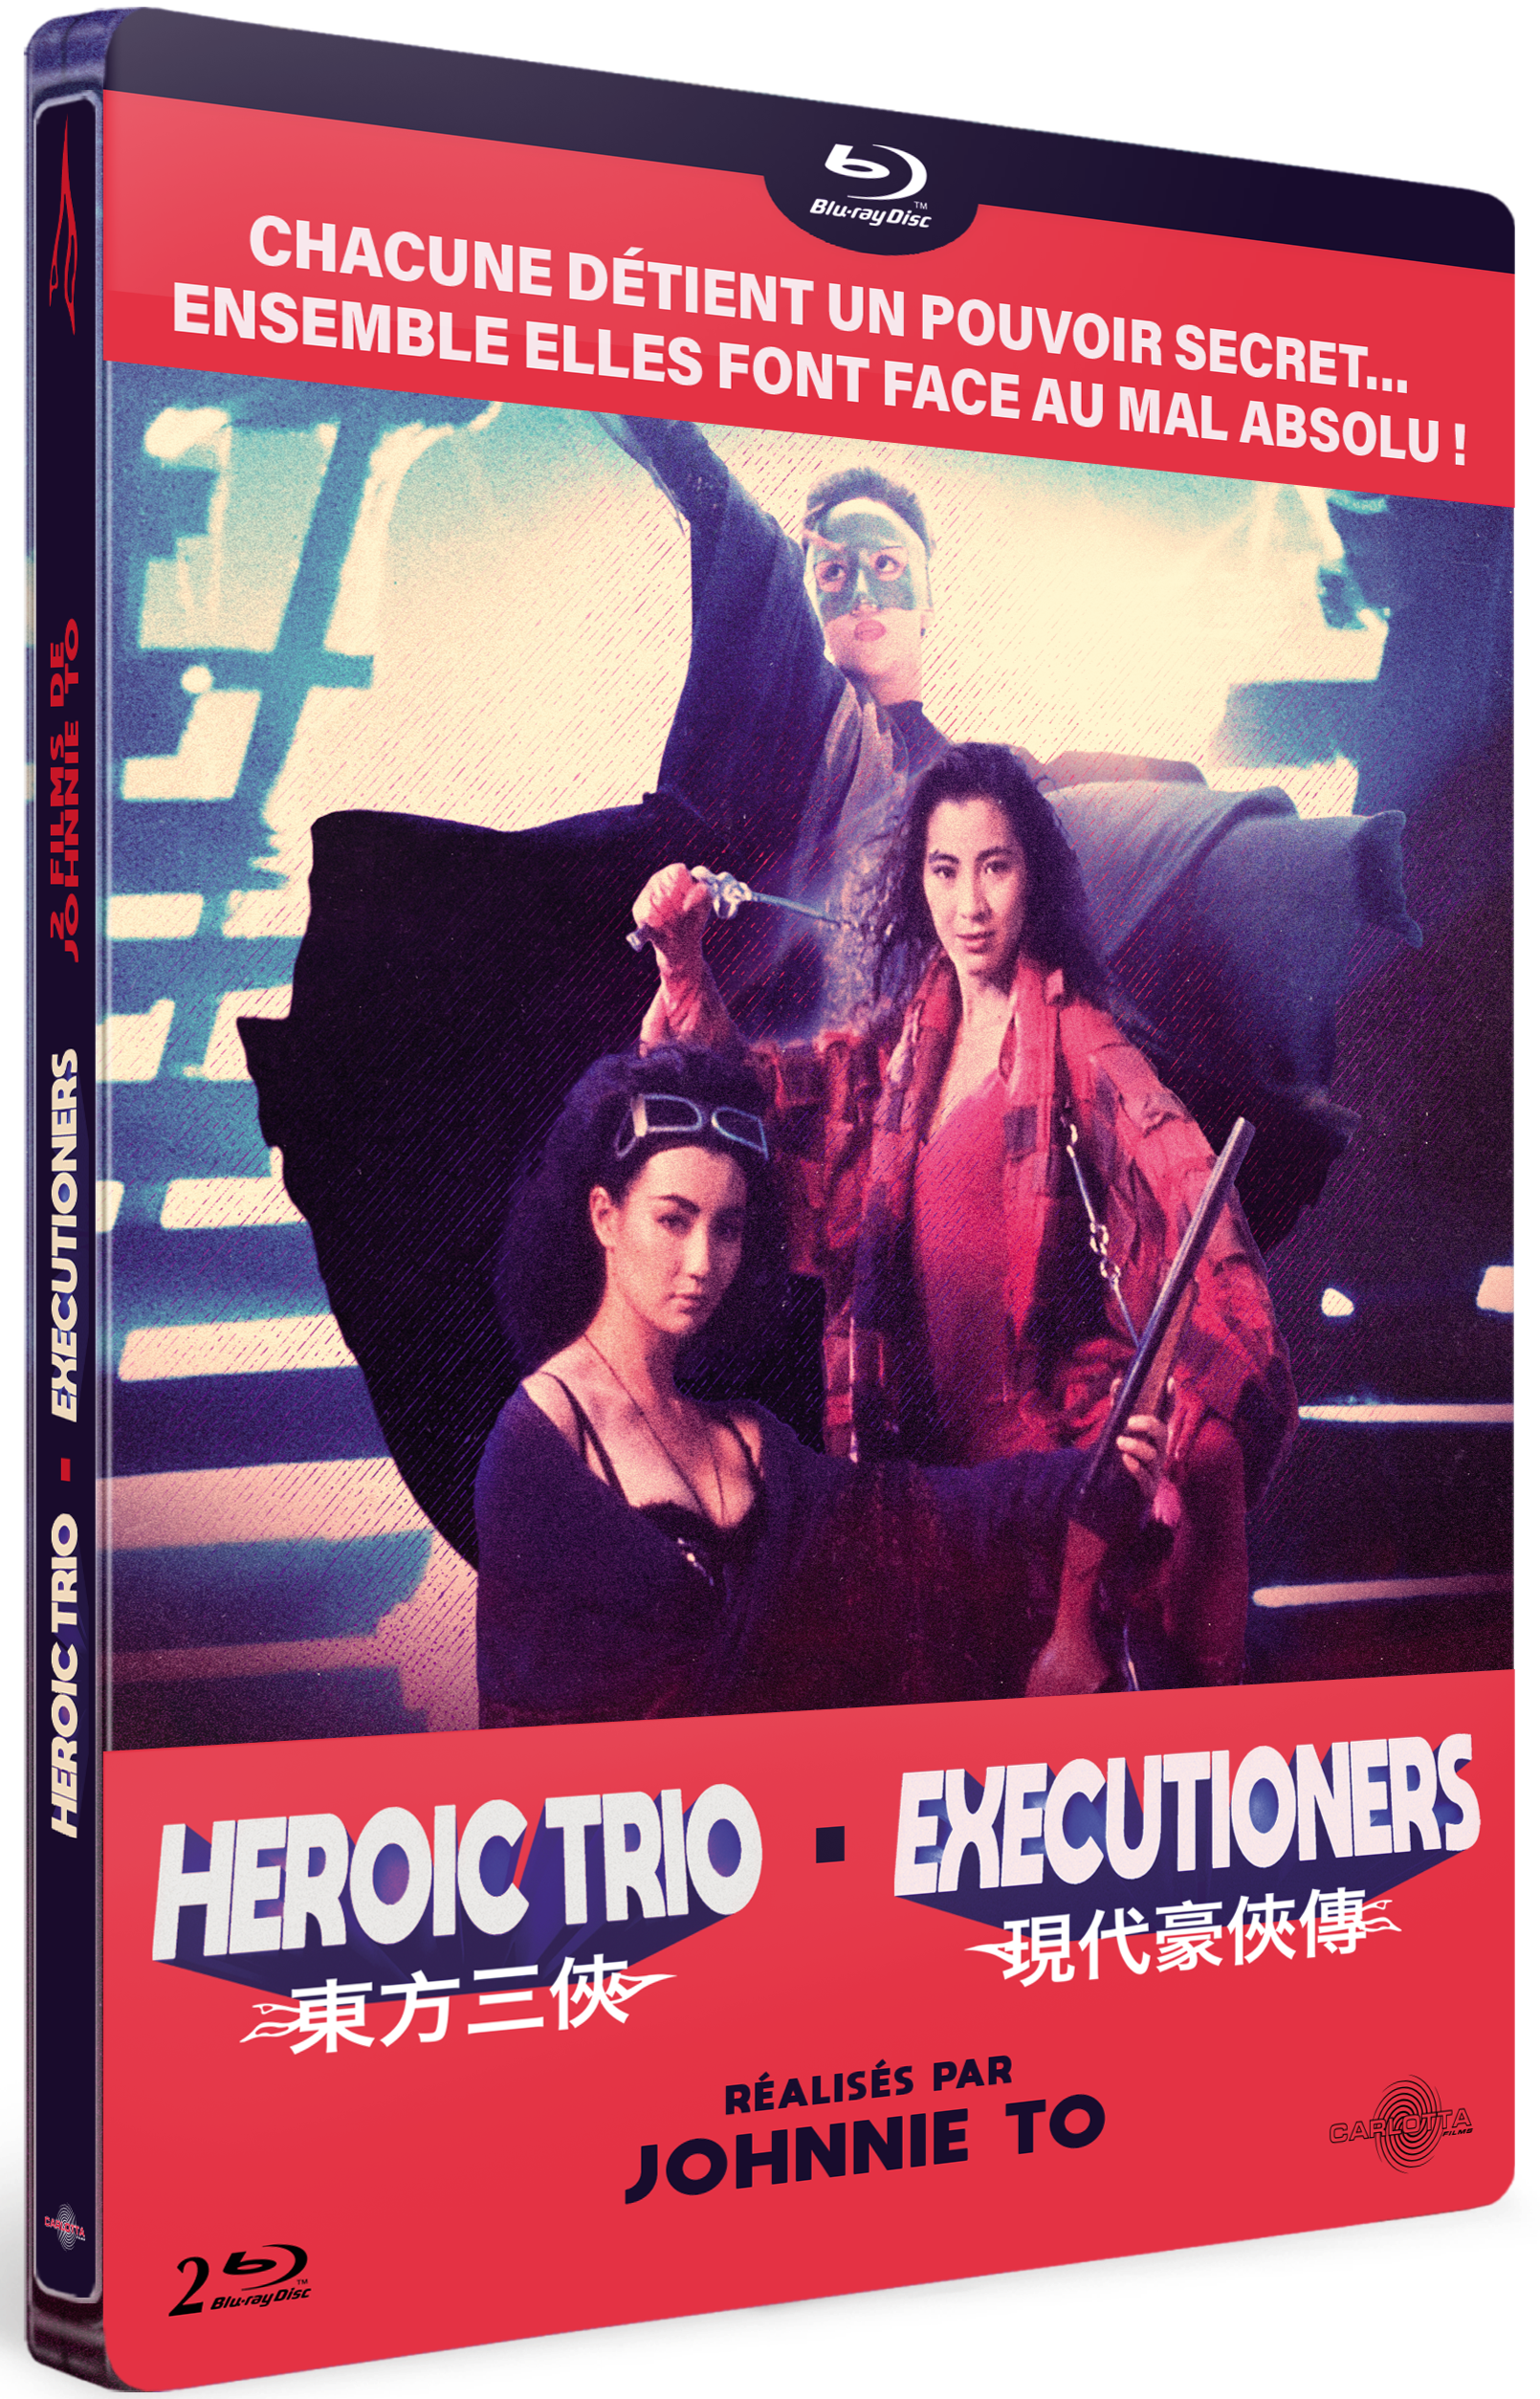 The Heroic Trio + Executioners by Johnnie To